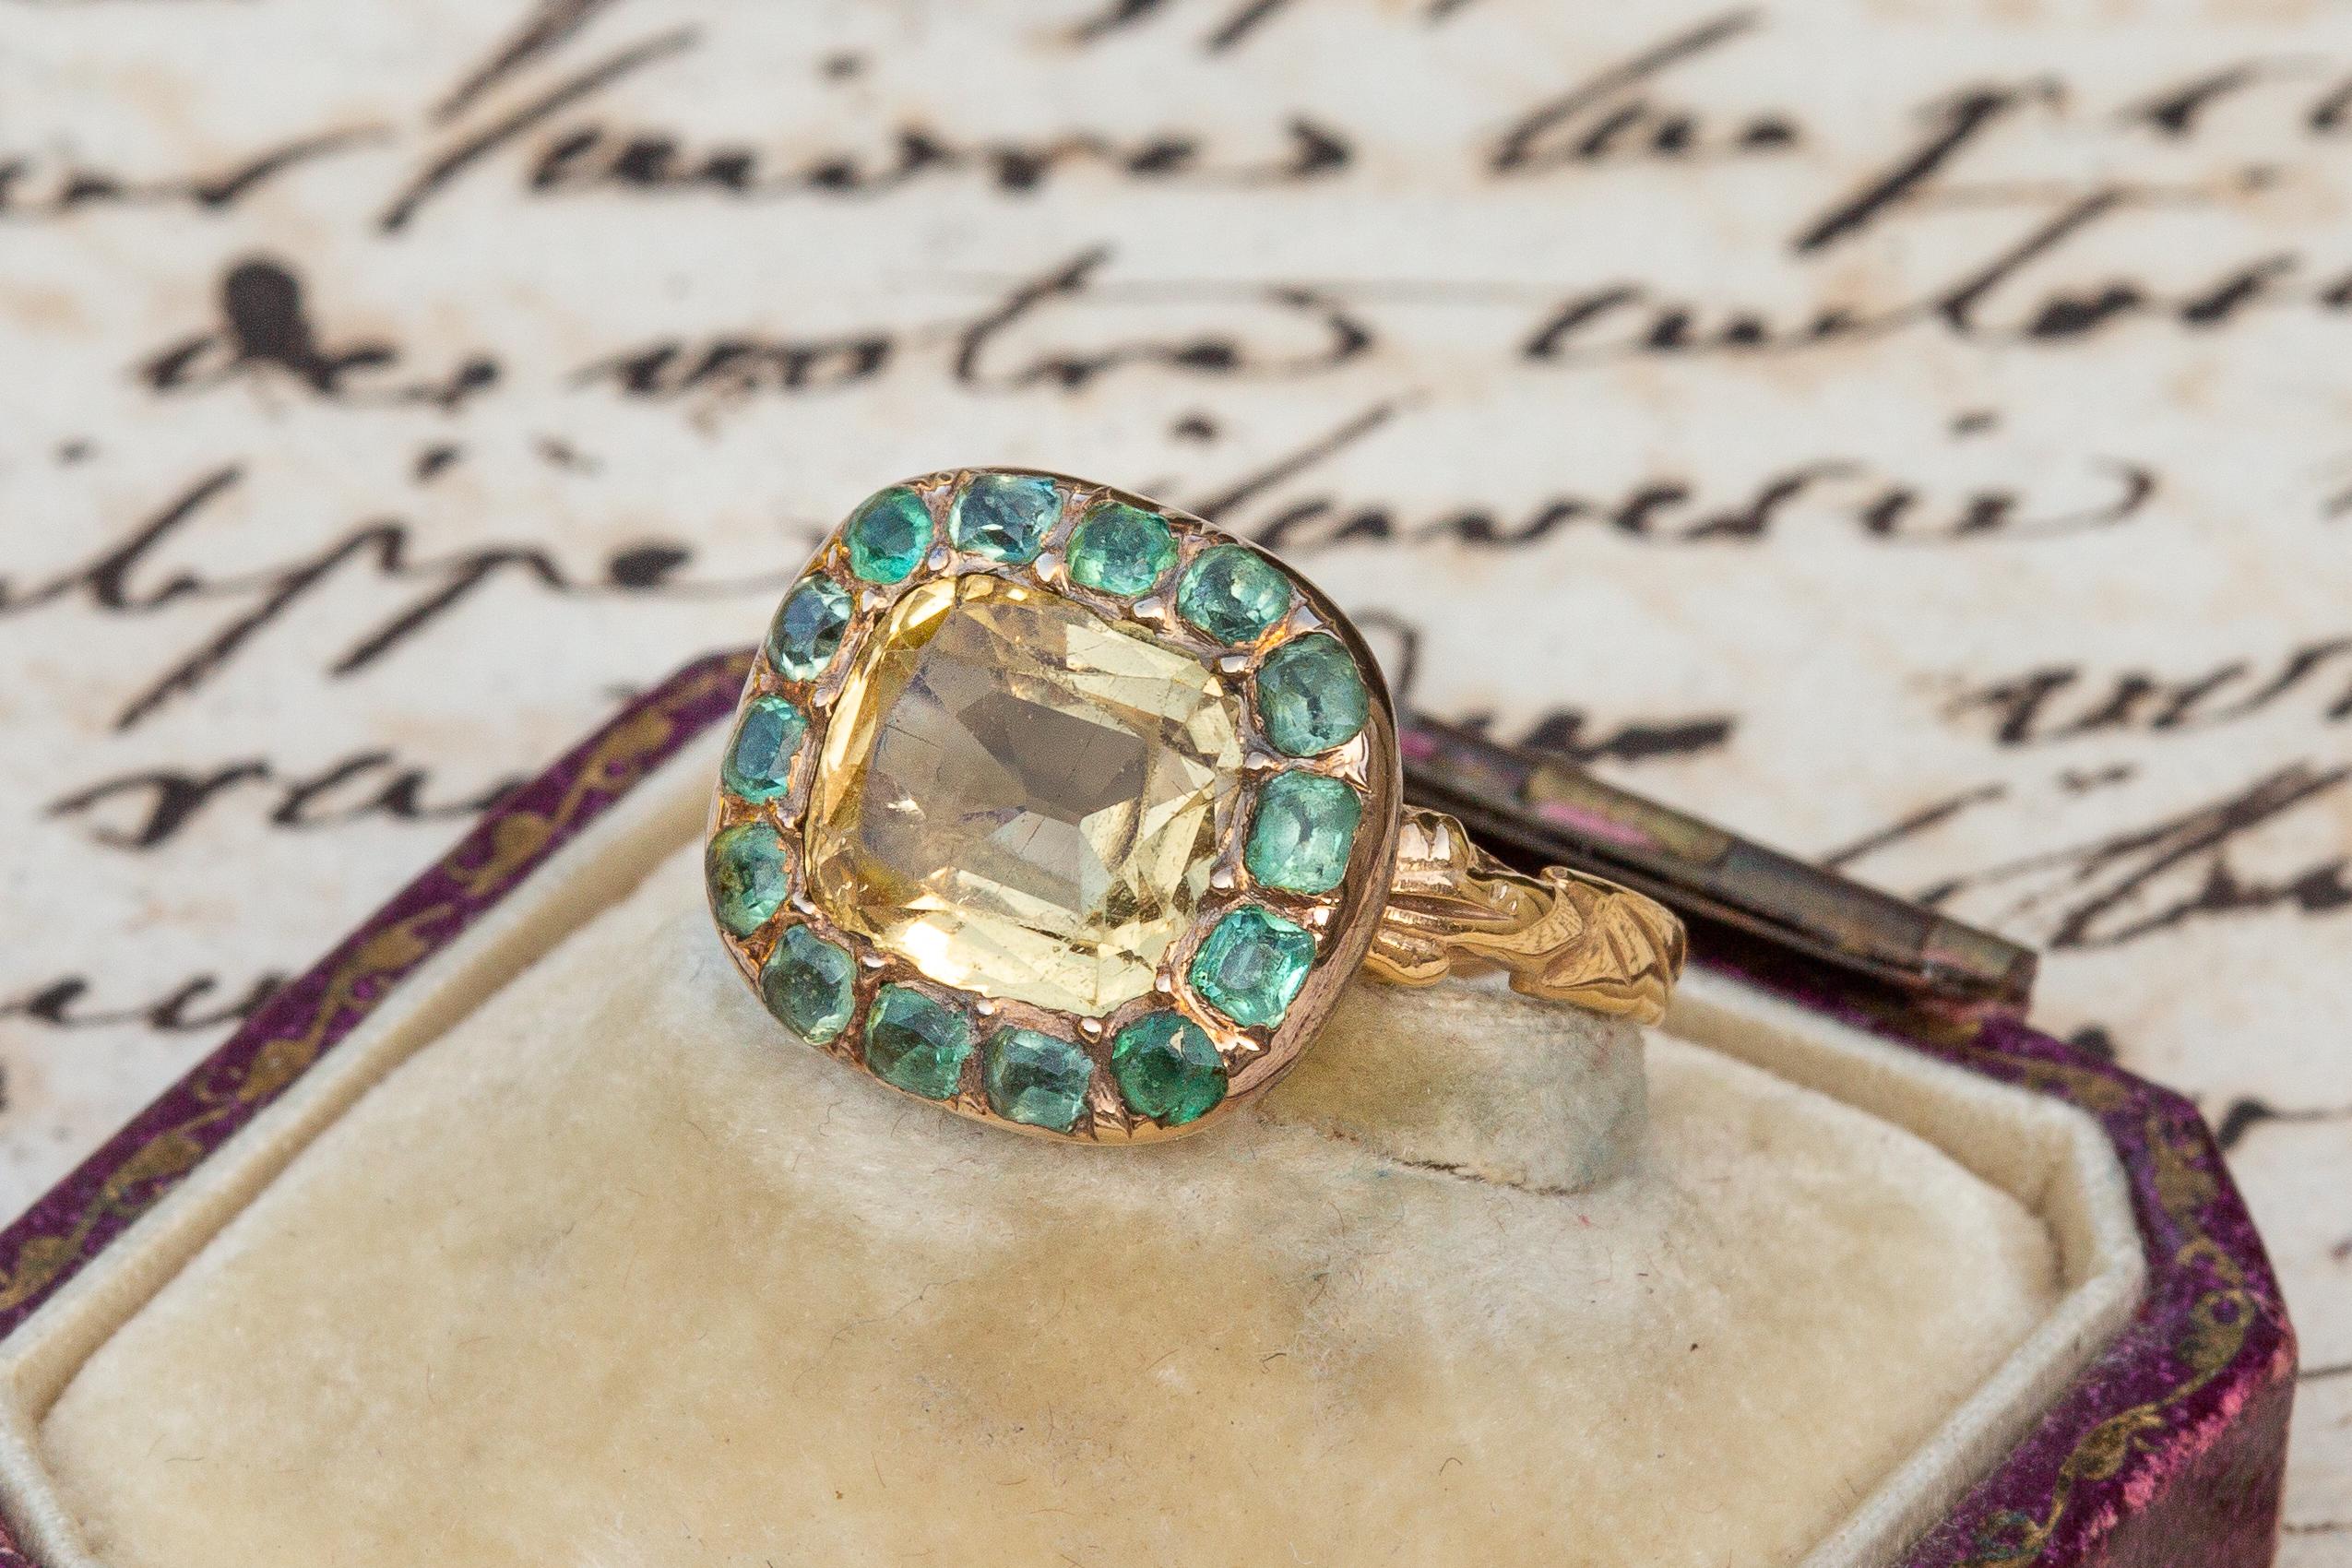 A stunning late 18th century cluster ring set with a 2.12ct pale yellow citrine. It is surrounded by a halo of 14 cushion cut emeralds set in pinch collet settings. The detail of the ring is typical of French craftsmanship of the period; a shank